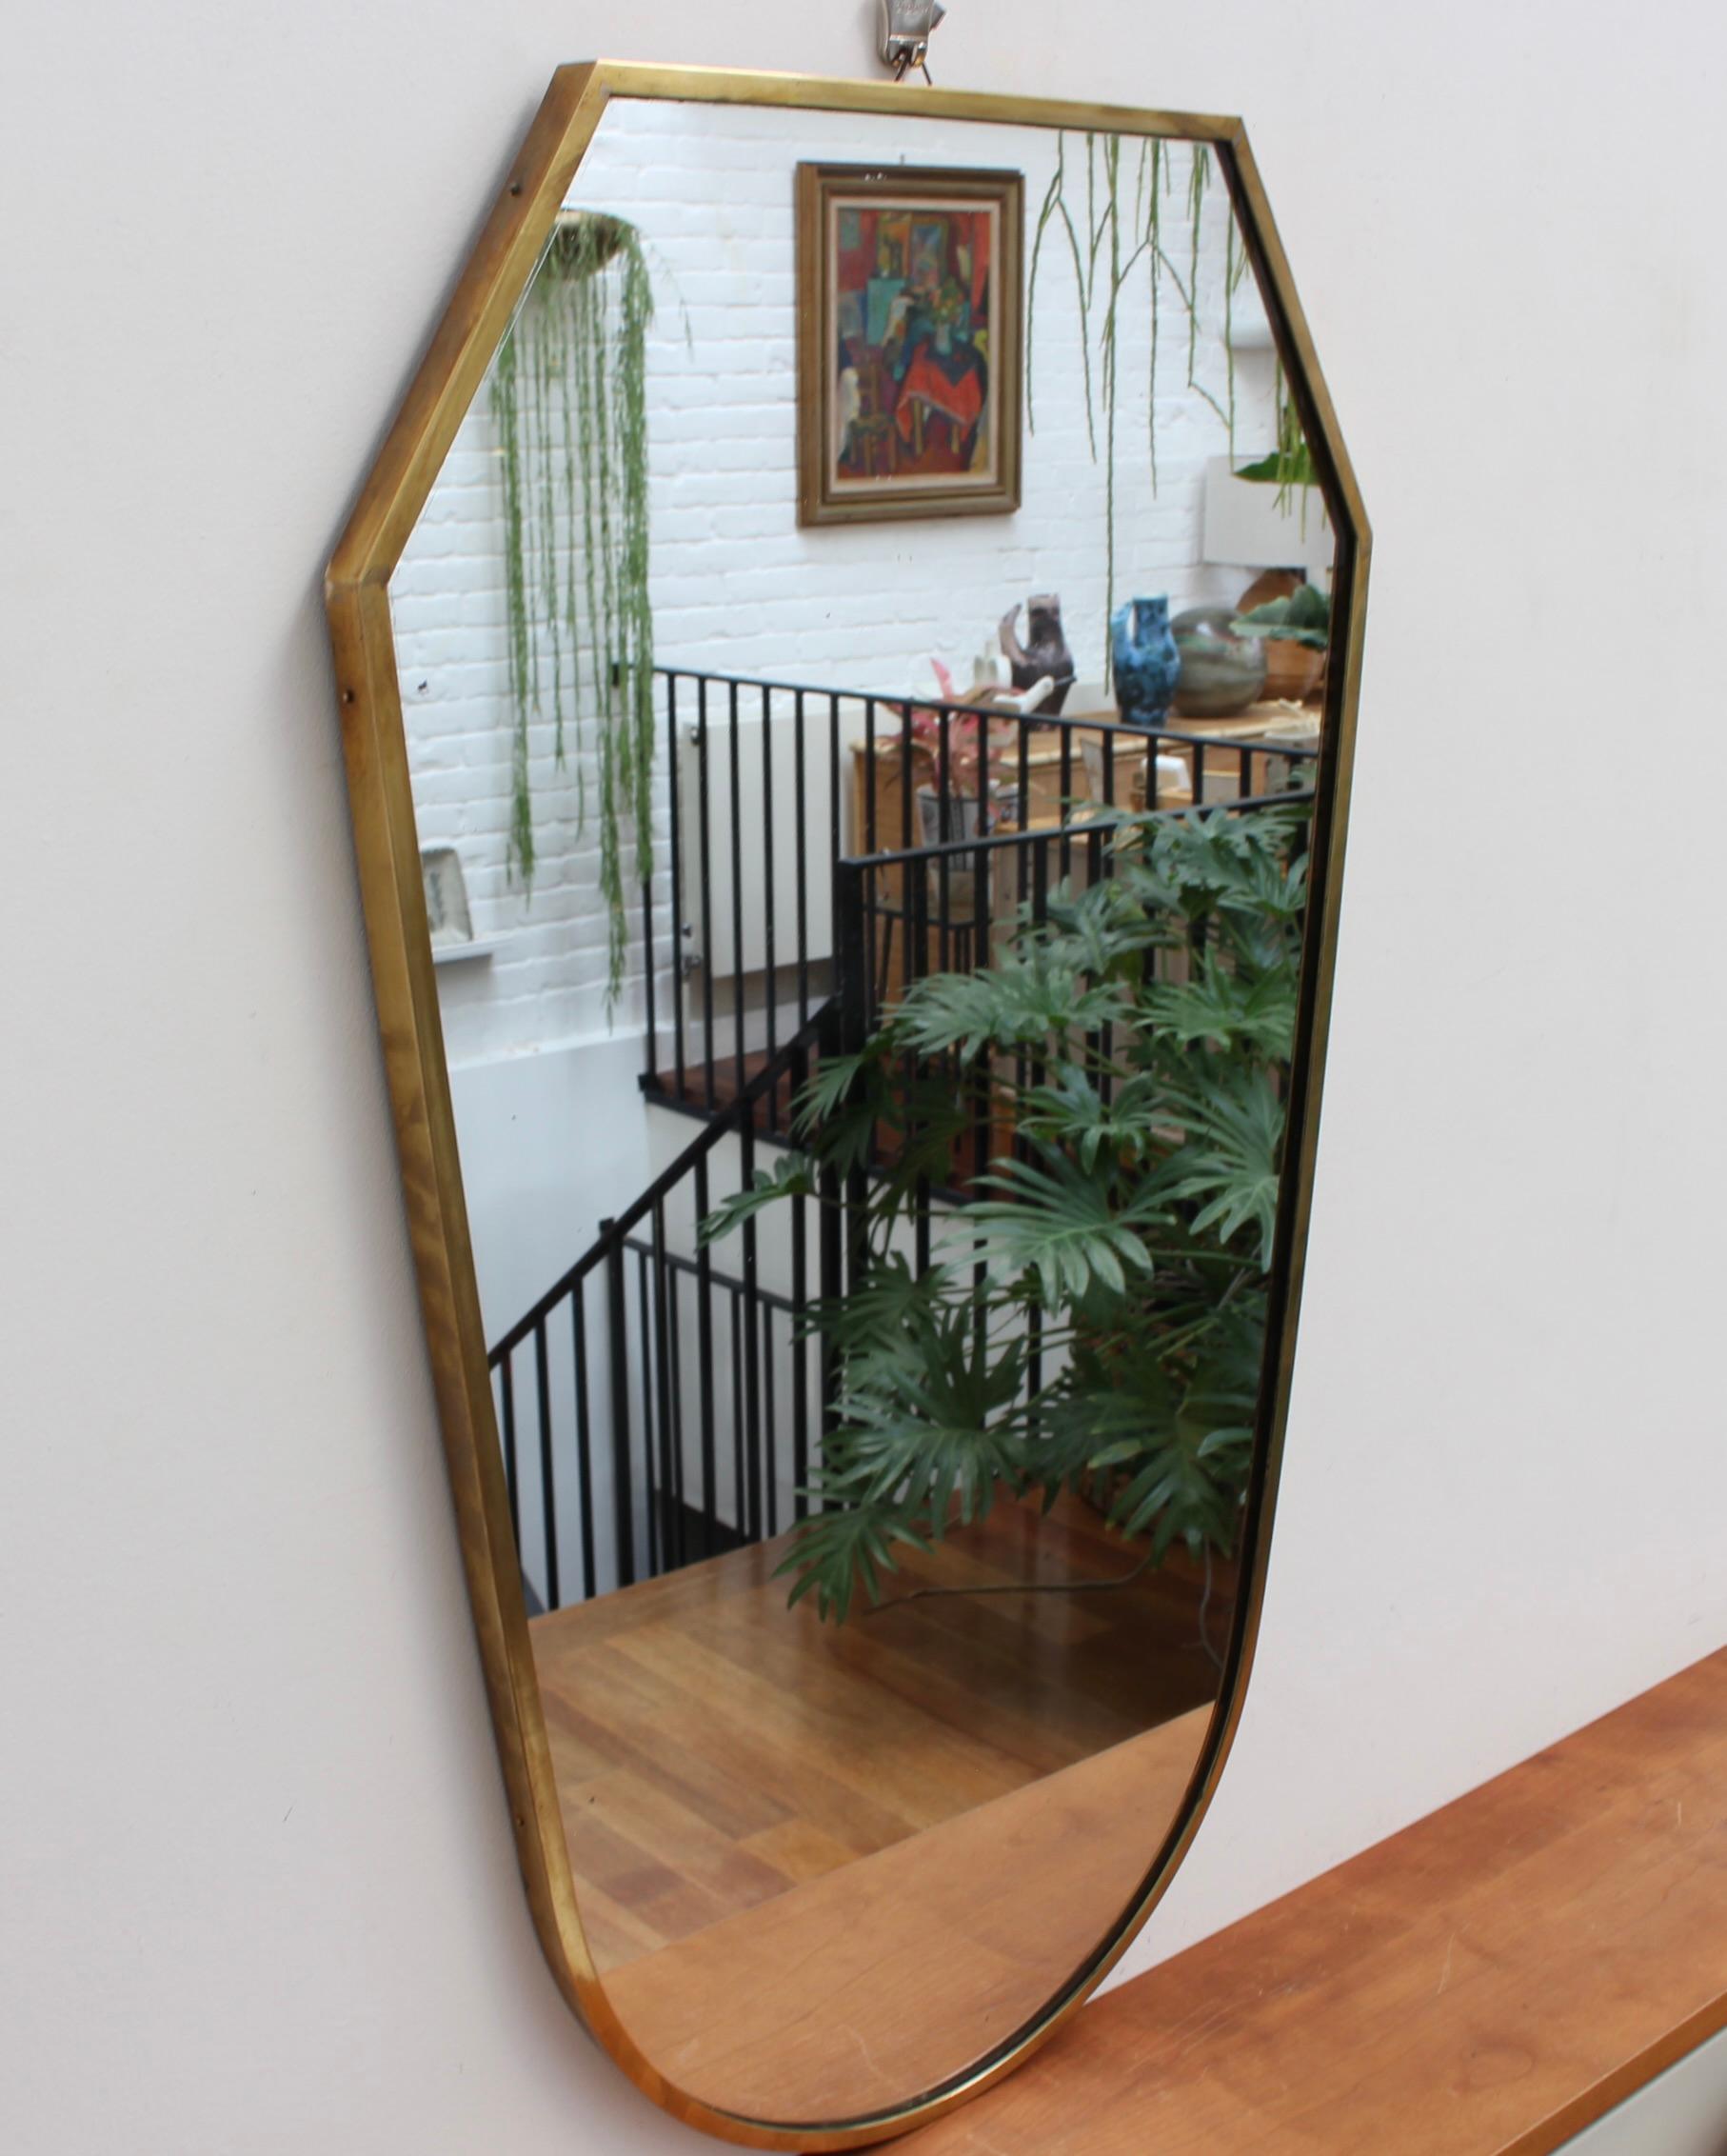 Mid-century Italian wall mirror with brass frame (circa 1950s). This mirror is simply elegant and characterful in a modern style. It is an angular, crest-shaped piece and in good overall condition. A characterful patina covers much of the brass